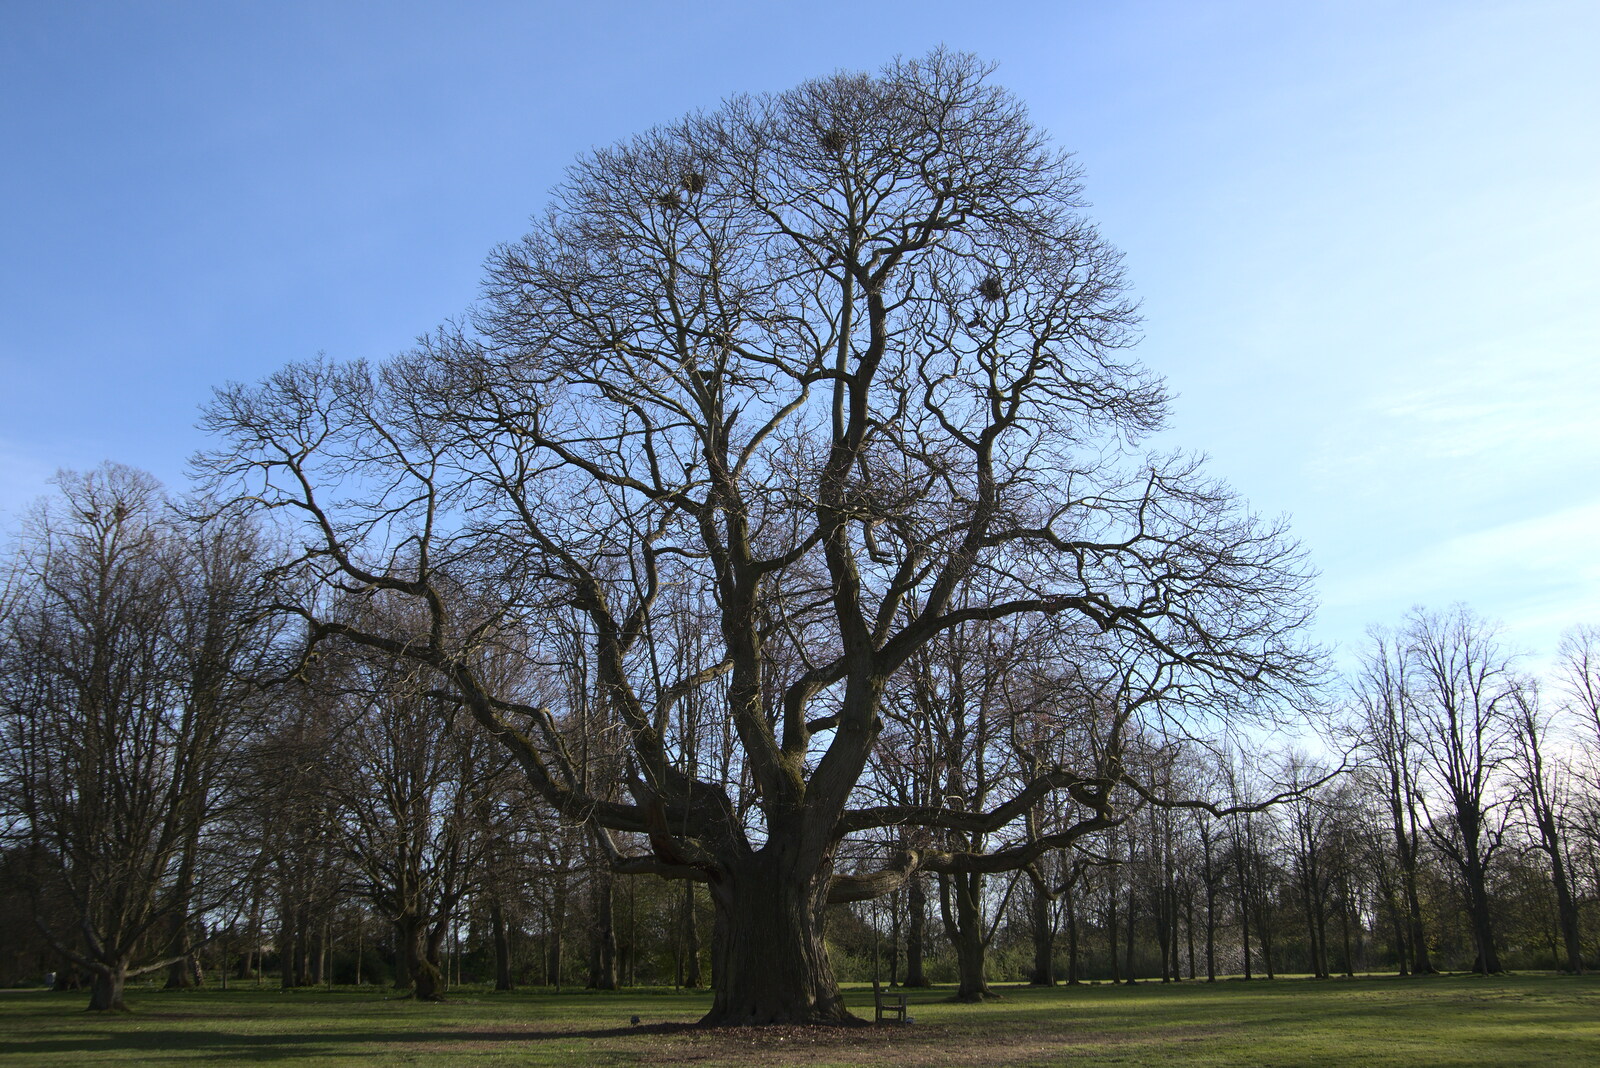 A grand old oak tree from BSCC Beer Garden Hypothermia, Hoxne and Brome, Suffolk - 22nd April 2021